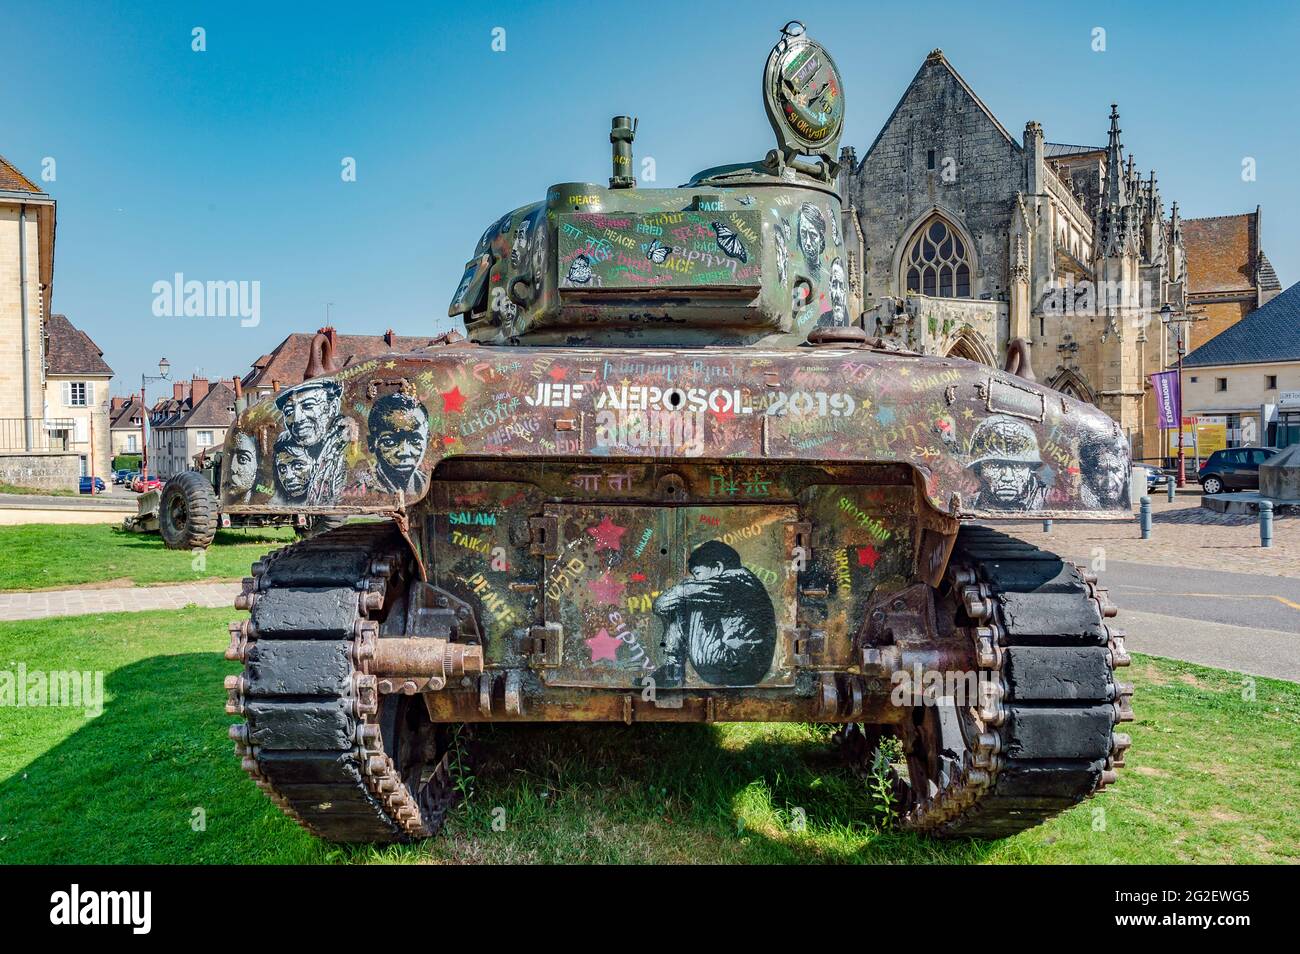 The Mémorial de Falaise - La Guerre des Civils recalls daily life during World War 2. Jef Aerosol painted the historic tank in front of the museum. Stock Photo